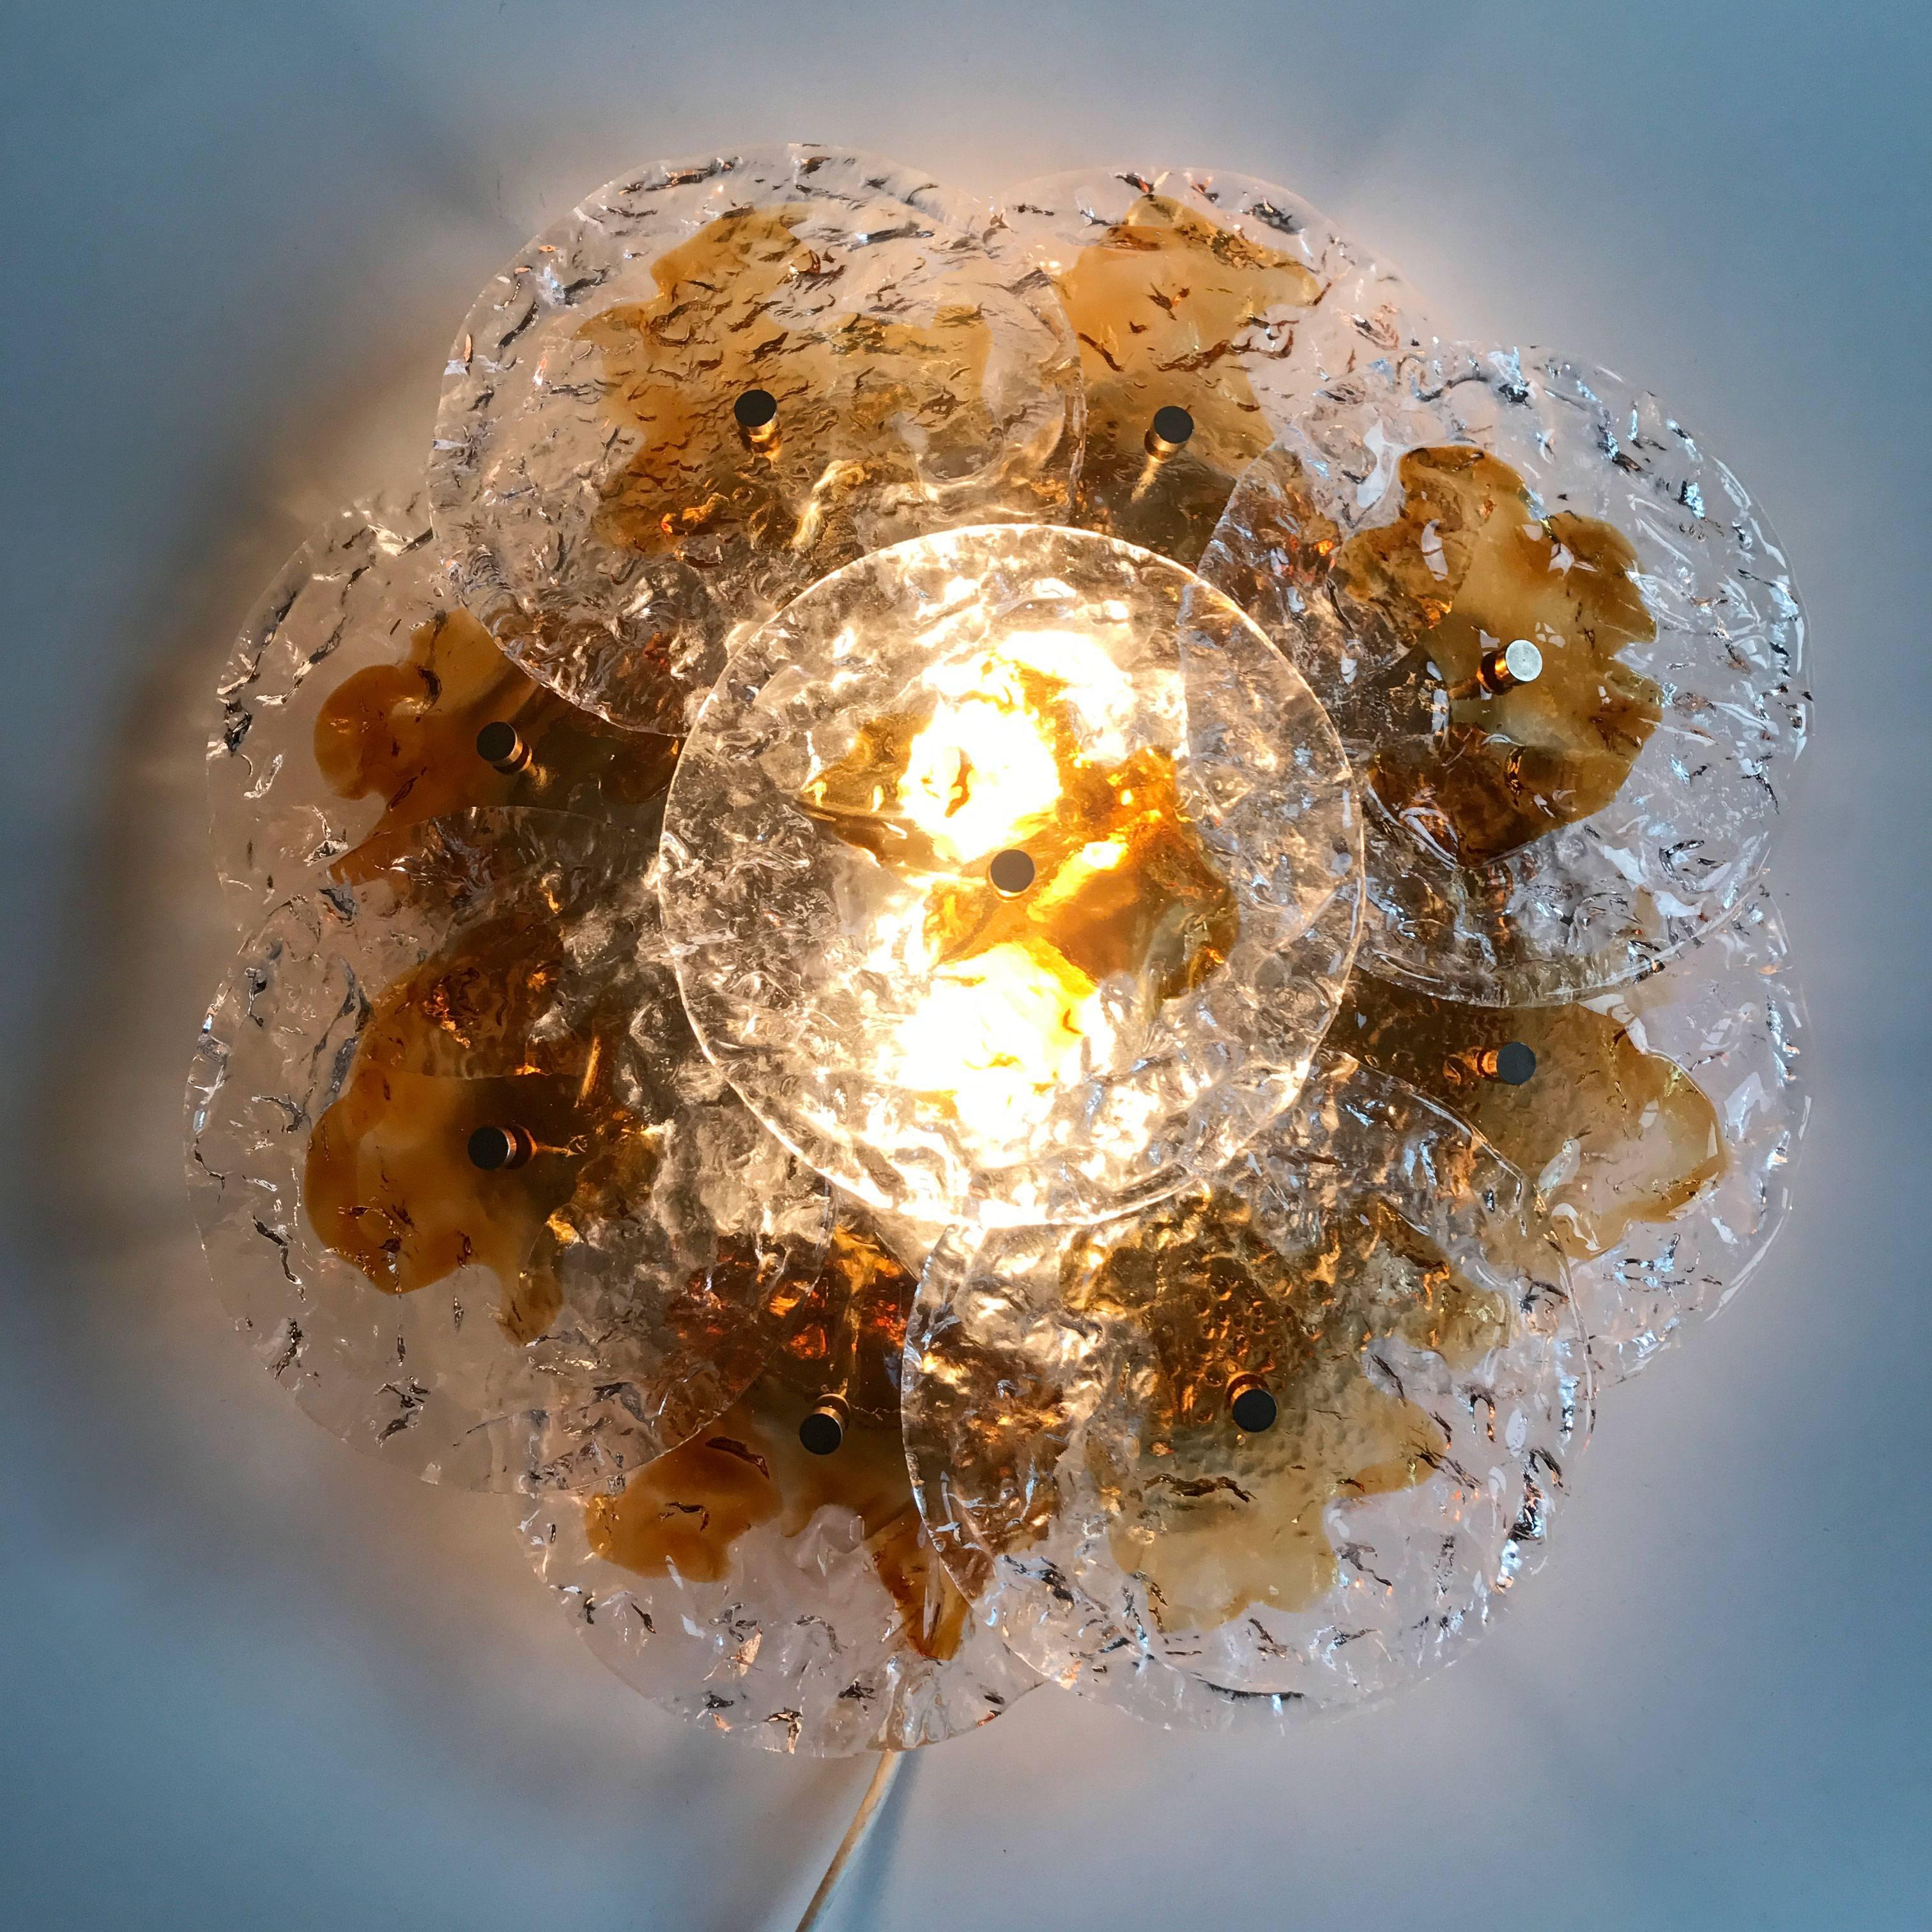 Amazing Mid-Century Modern flush mount ceiling lamp or wall light with Murano glass discs. Designed by Carlo Nason in 1960s. Manufactured by Mazzega, Italy.
Executed in nine bicolor Murano glass discs and metal fixture. The lamp needs two E27 screw